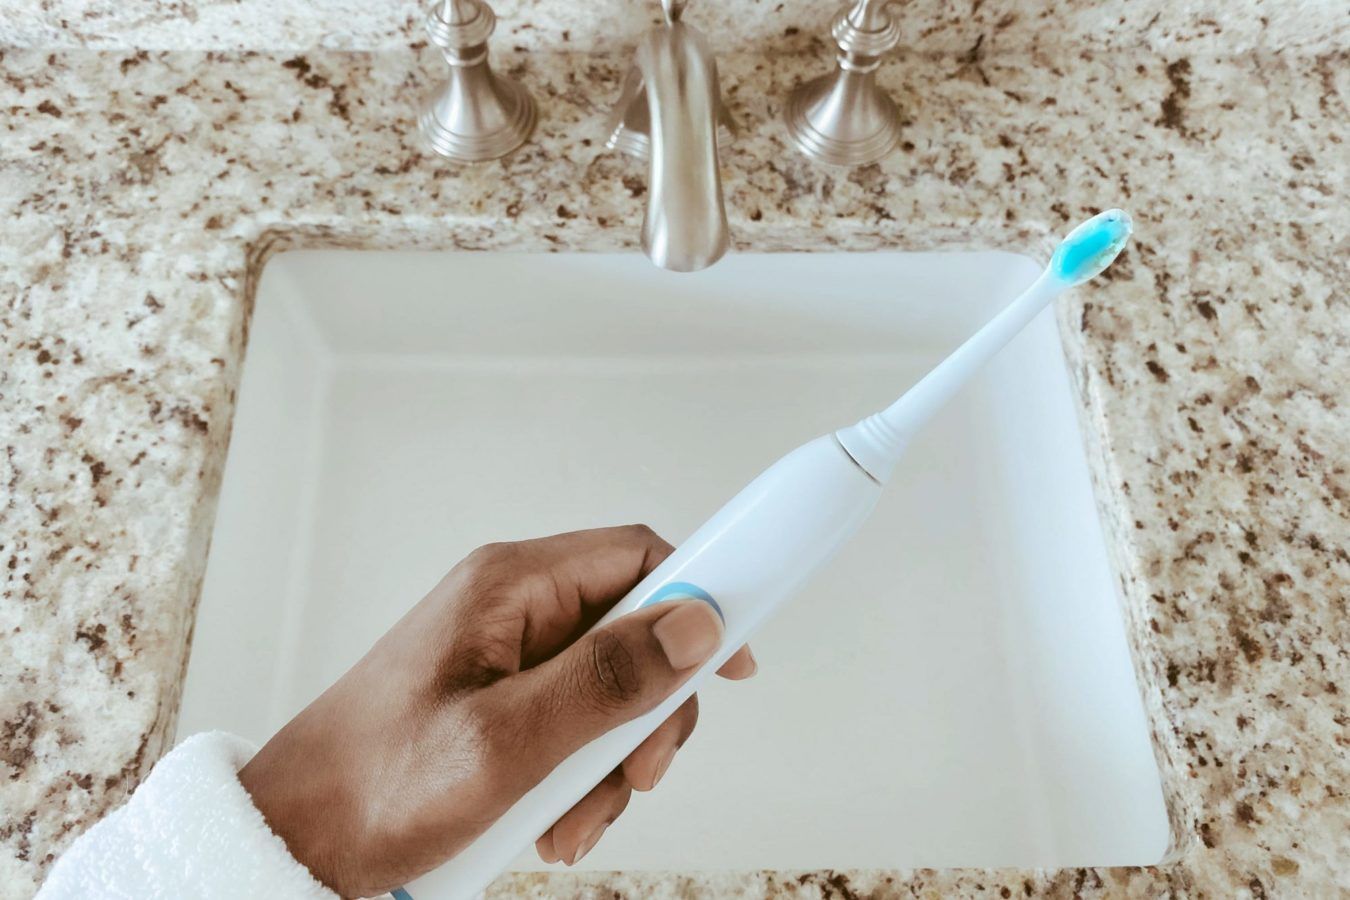 How does a manual toothbrush stack up against electric?